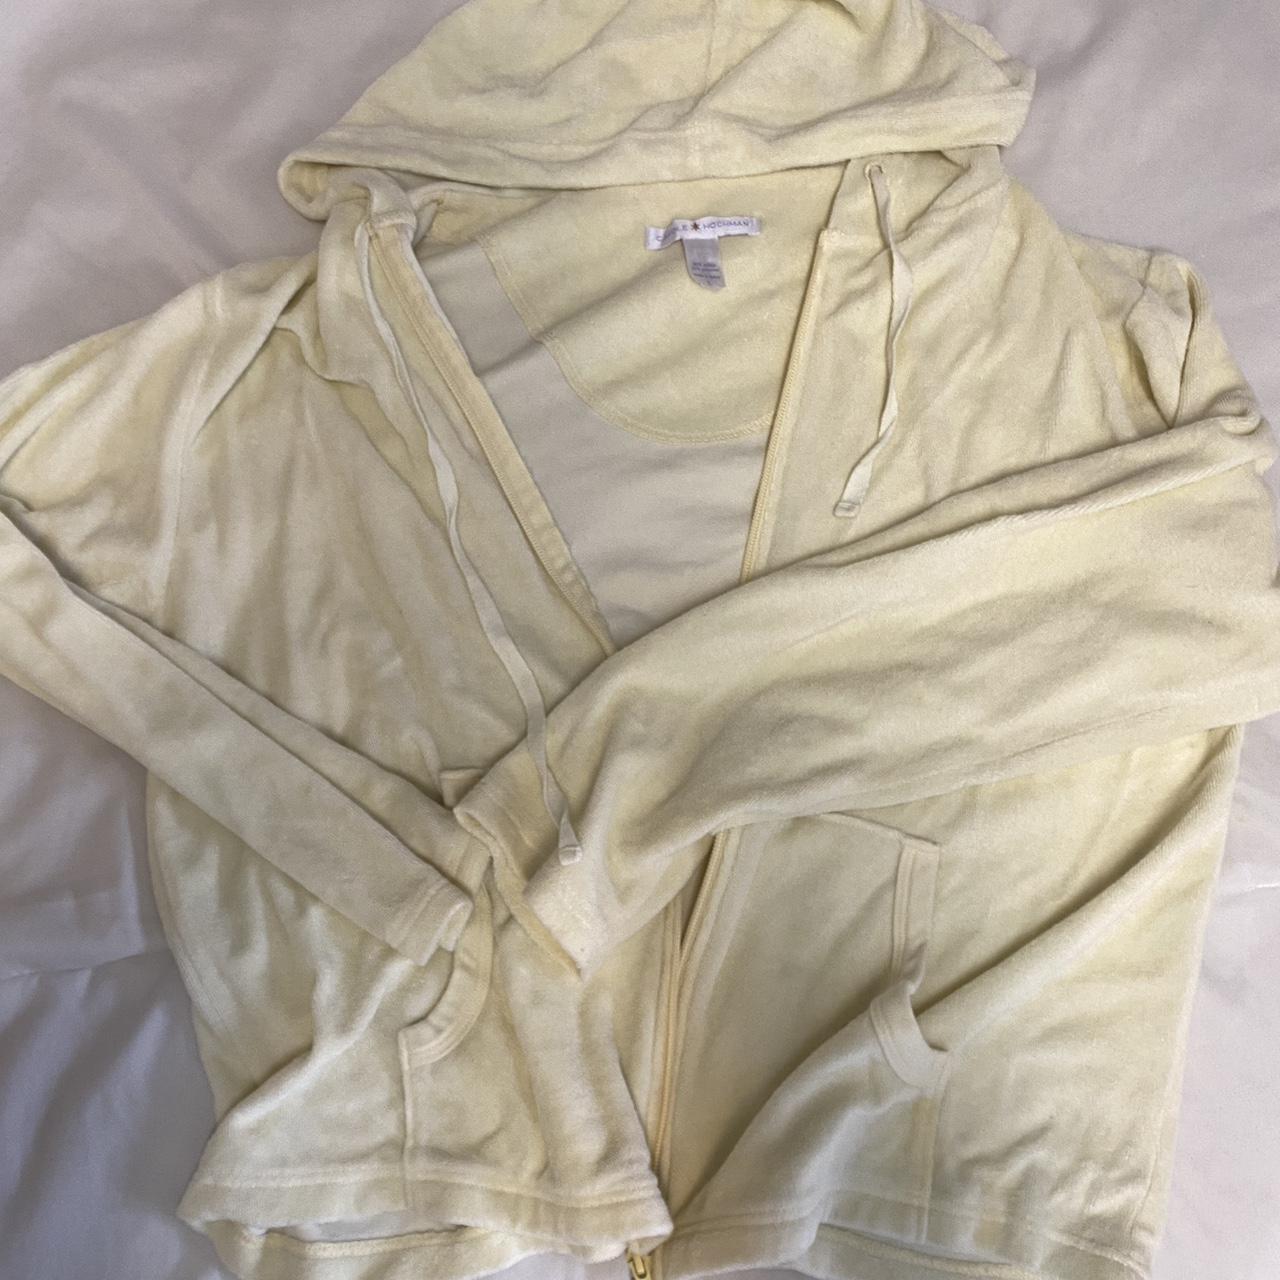 item listed by rnbthrift